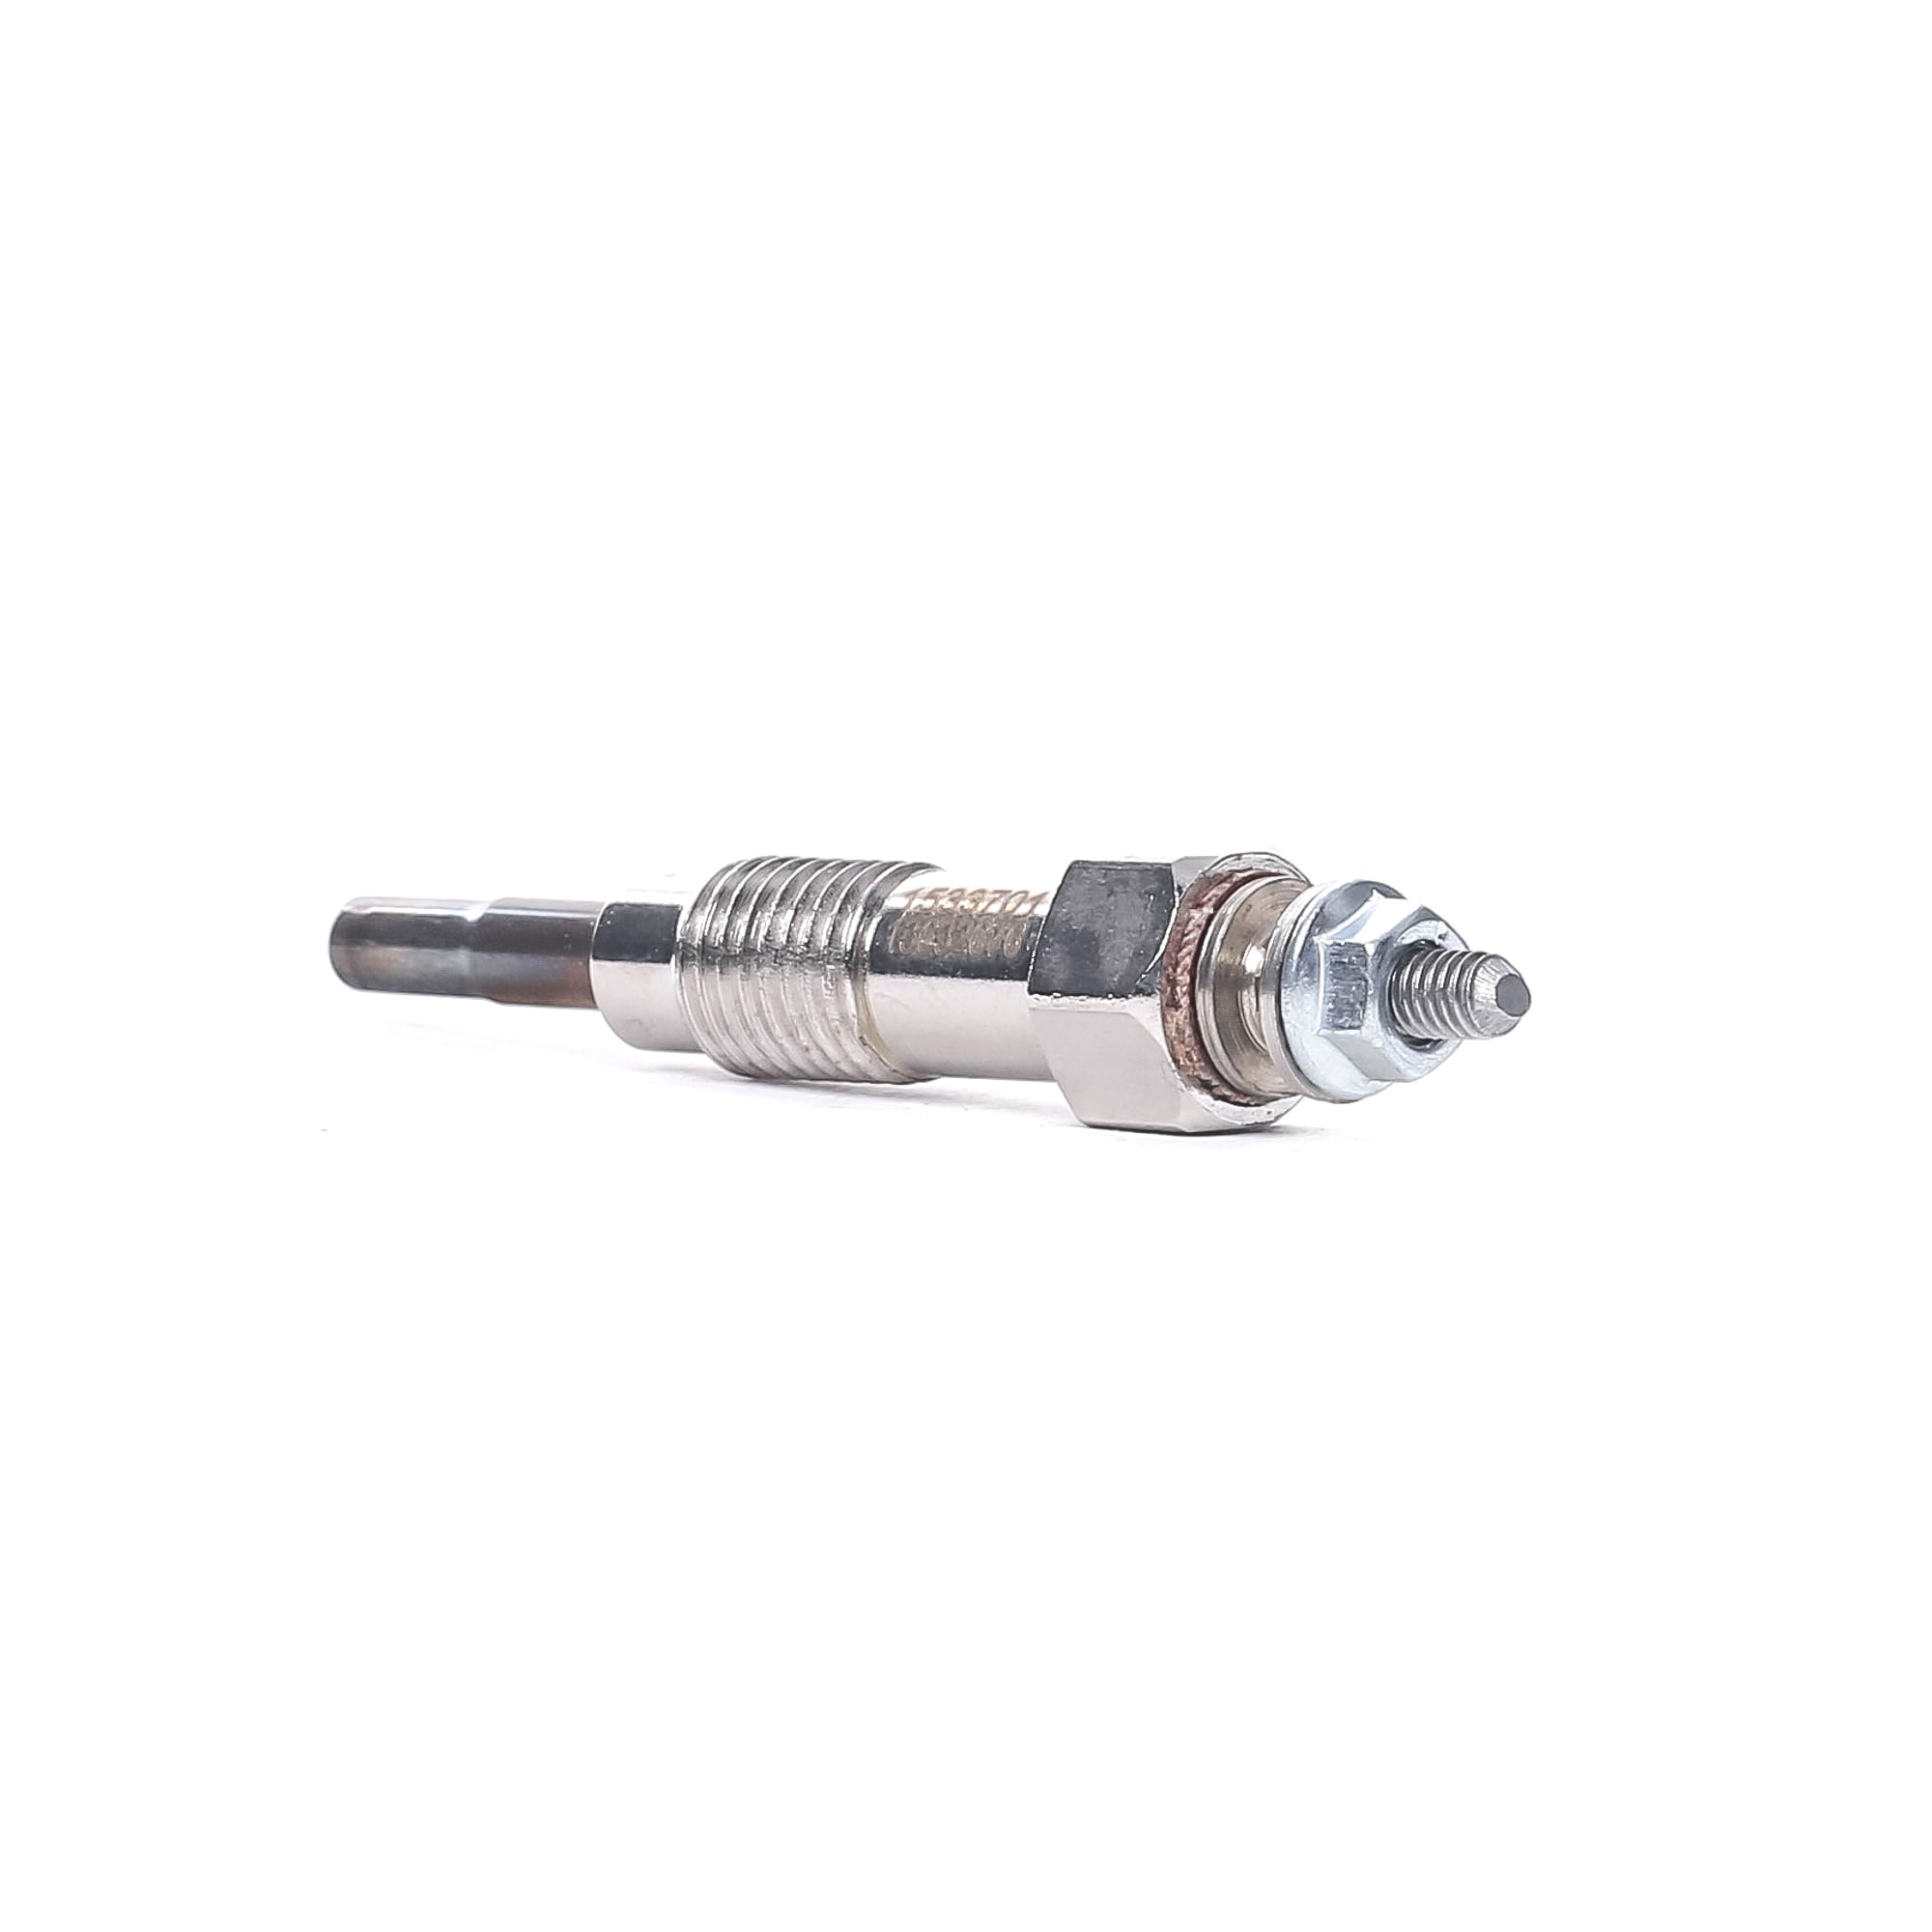 RIDEX 11V M10x1.25, Pencil-type Glow Plug, after-glow capable, 0,5 Ohm, 68 mm, 1 Nm Total Length: 68mm, Thread Size: M10x1.25 Glow plugs 243G0096 buy